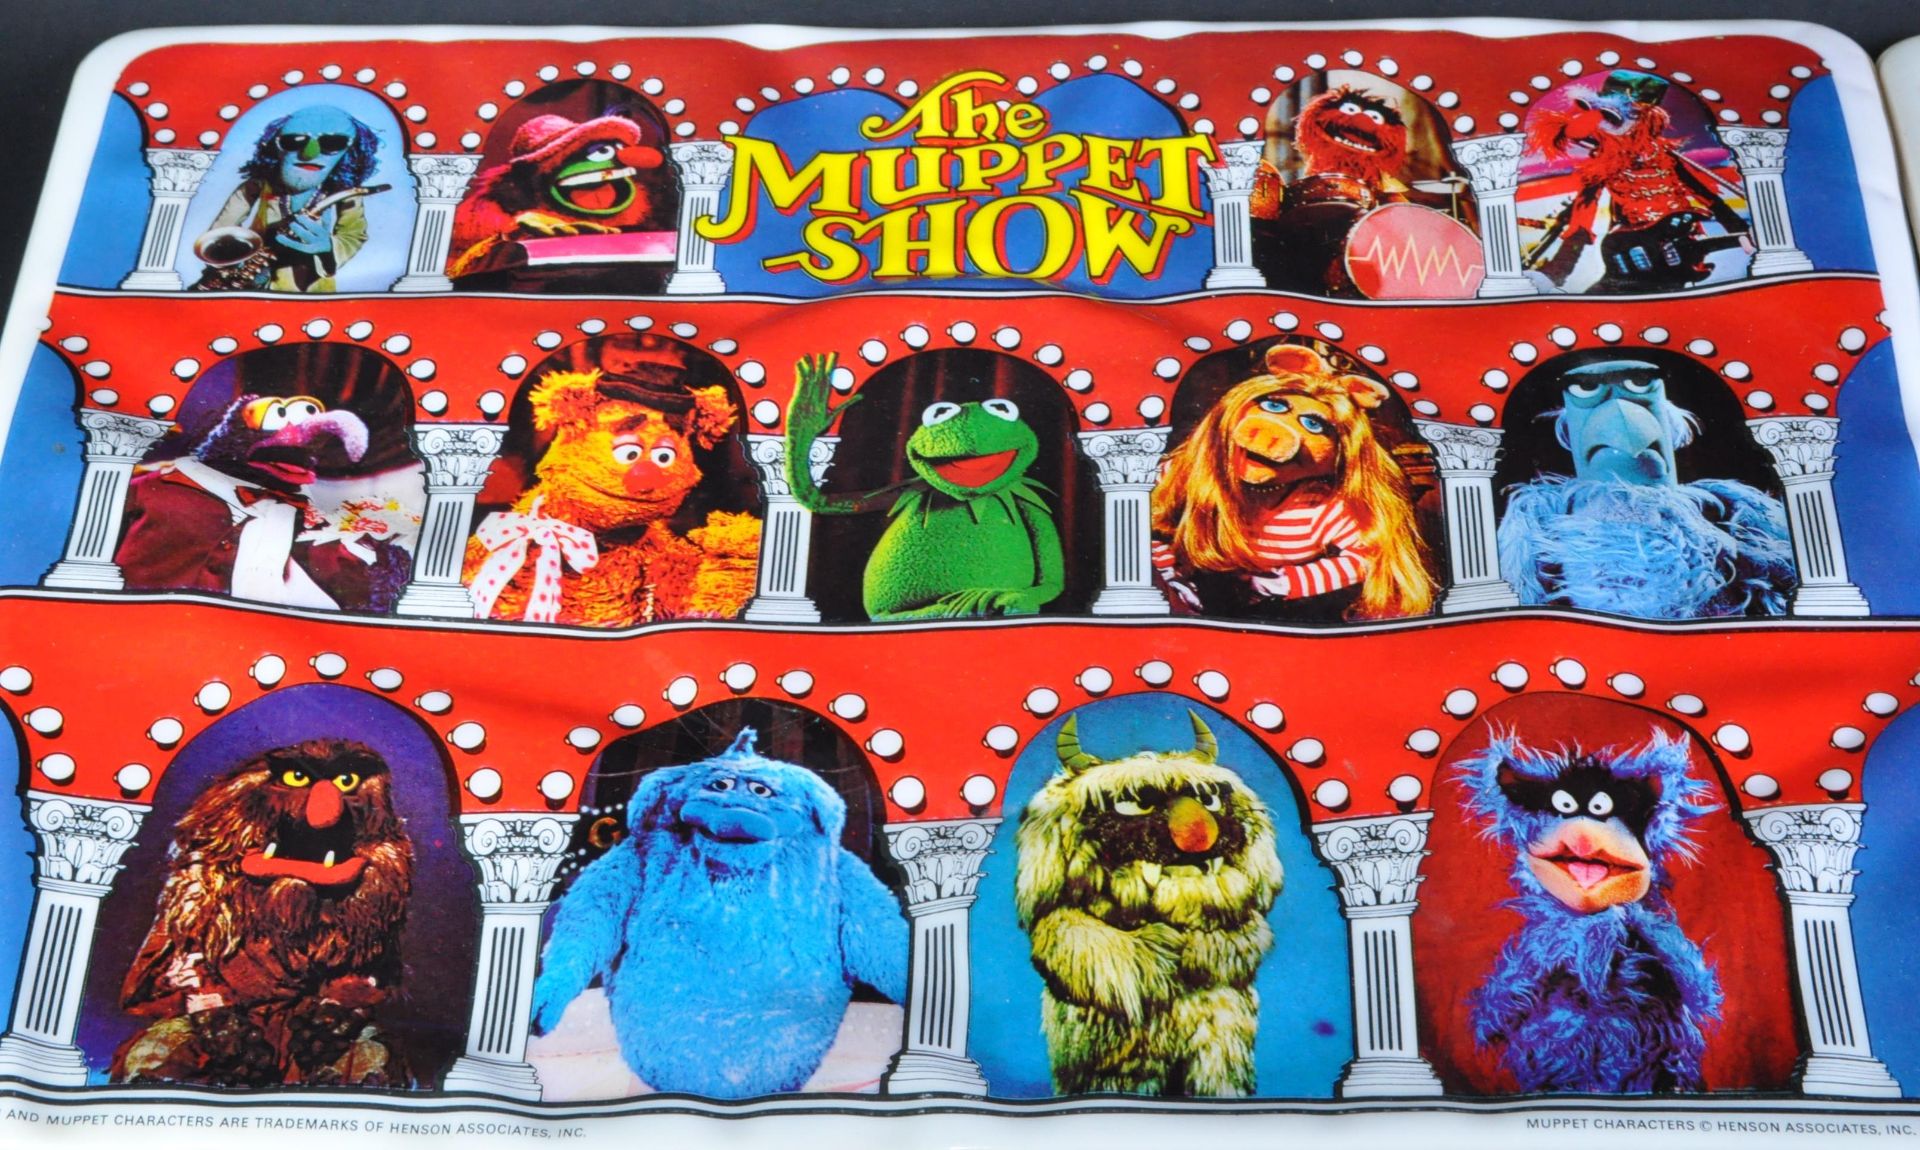 THE MUPPET SHOW - SET OF VINTAGE CHILDREN'S PLACEMATS - Image 5 of 5